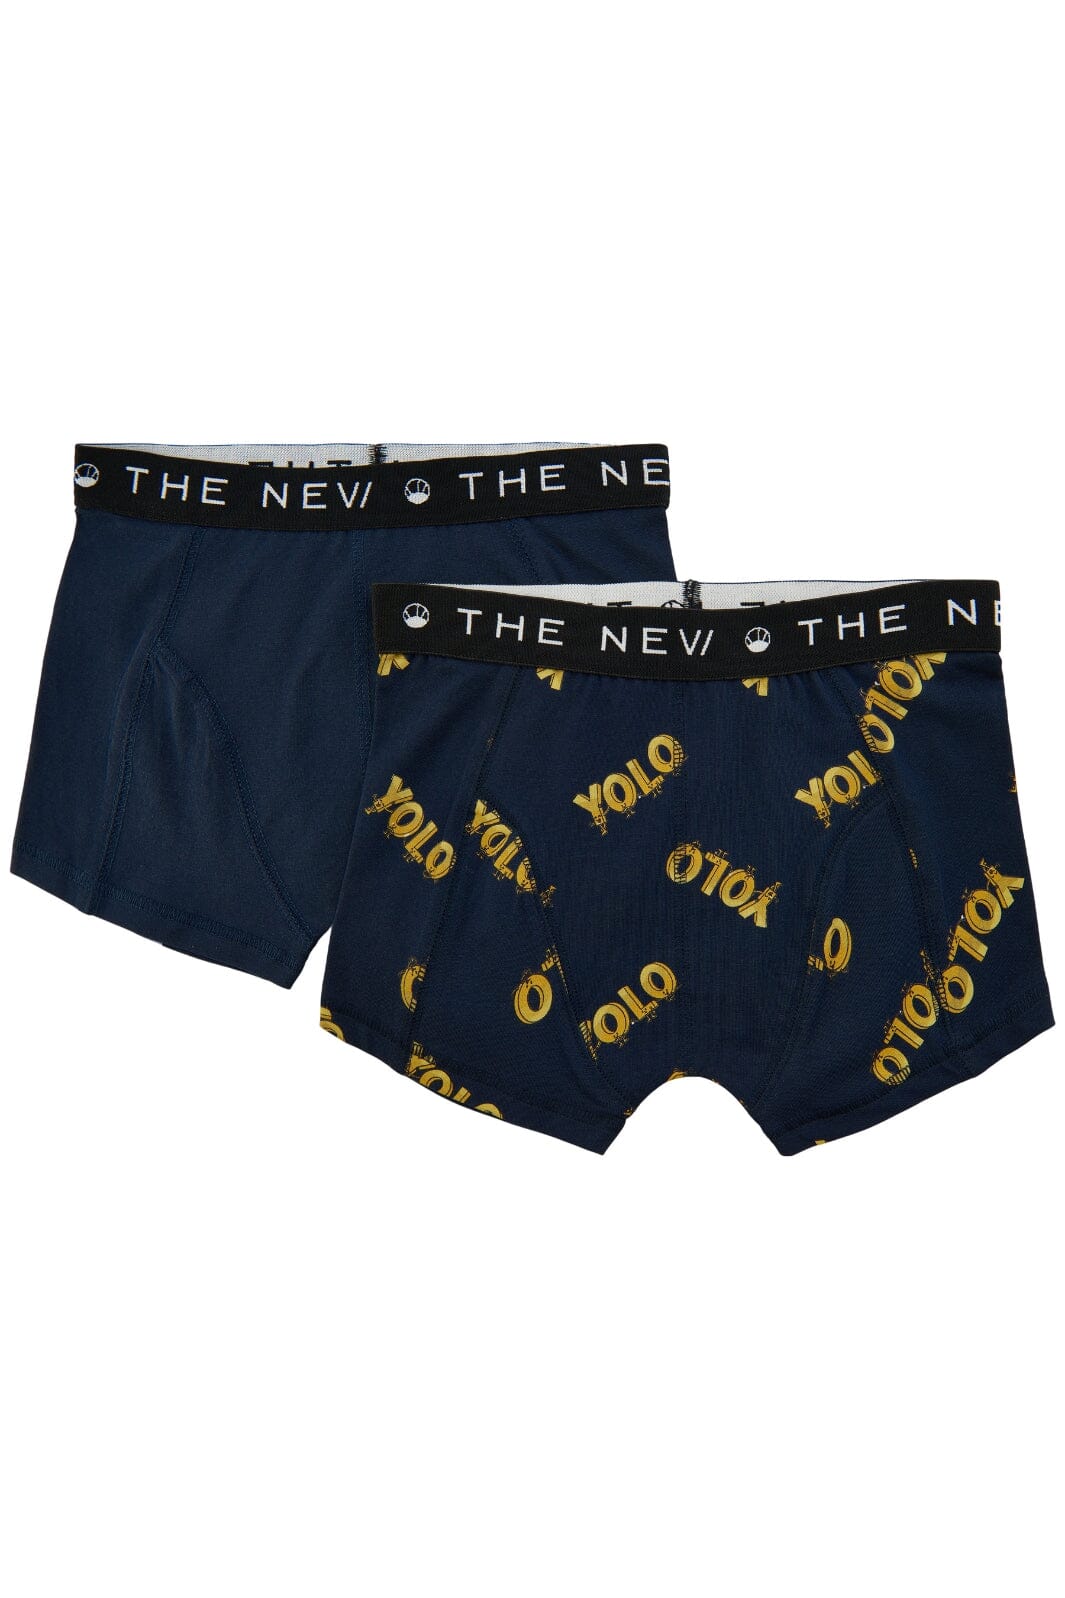 The New - The New Boxers 2-Pack - Navy Blazer 